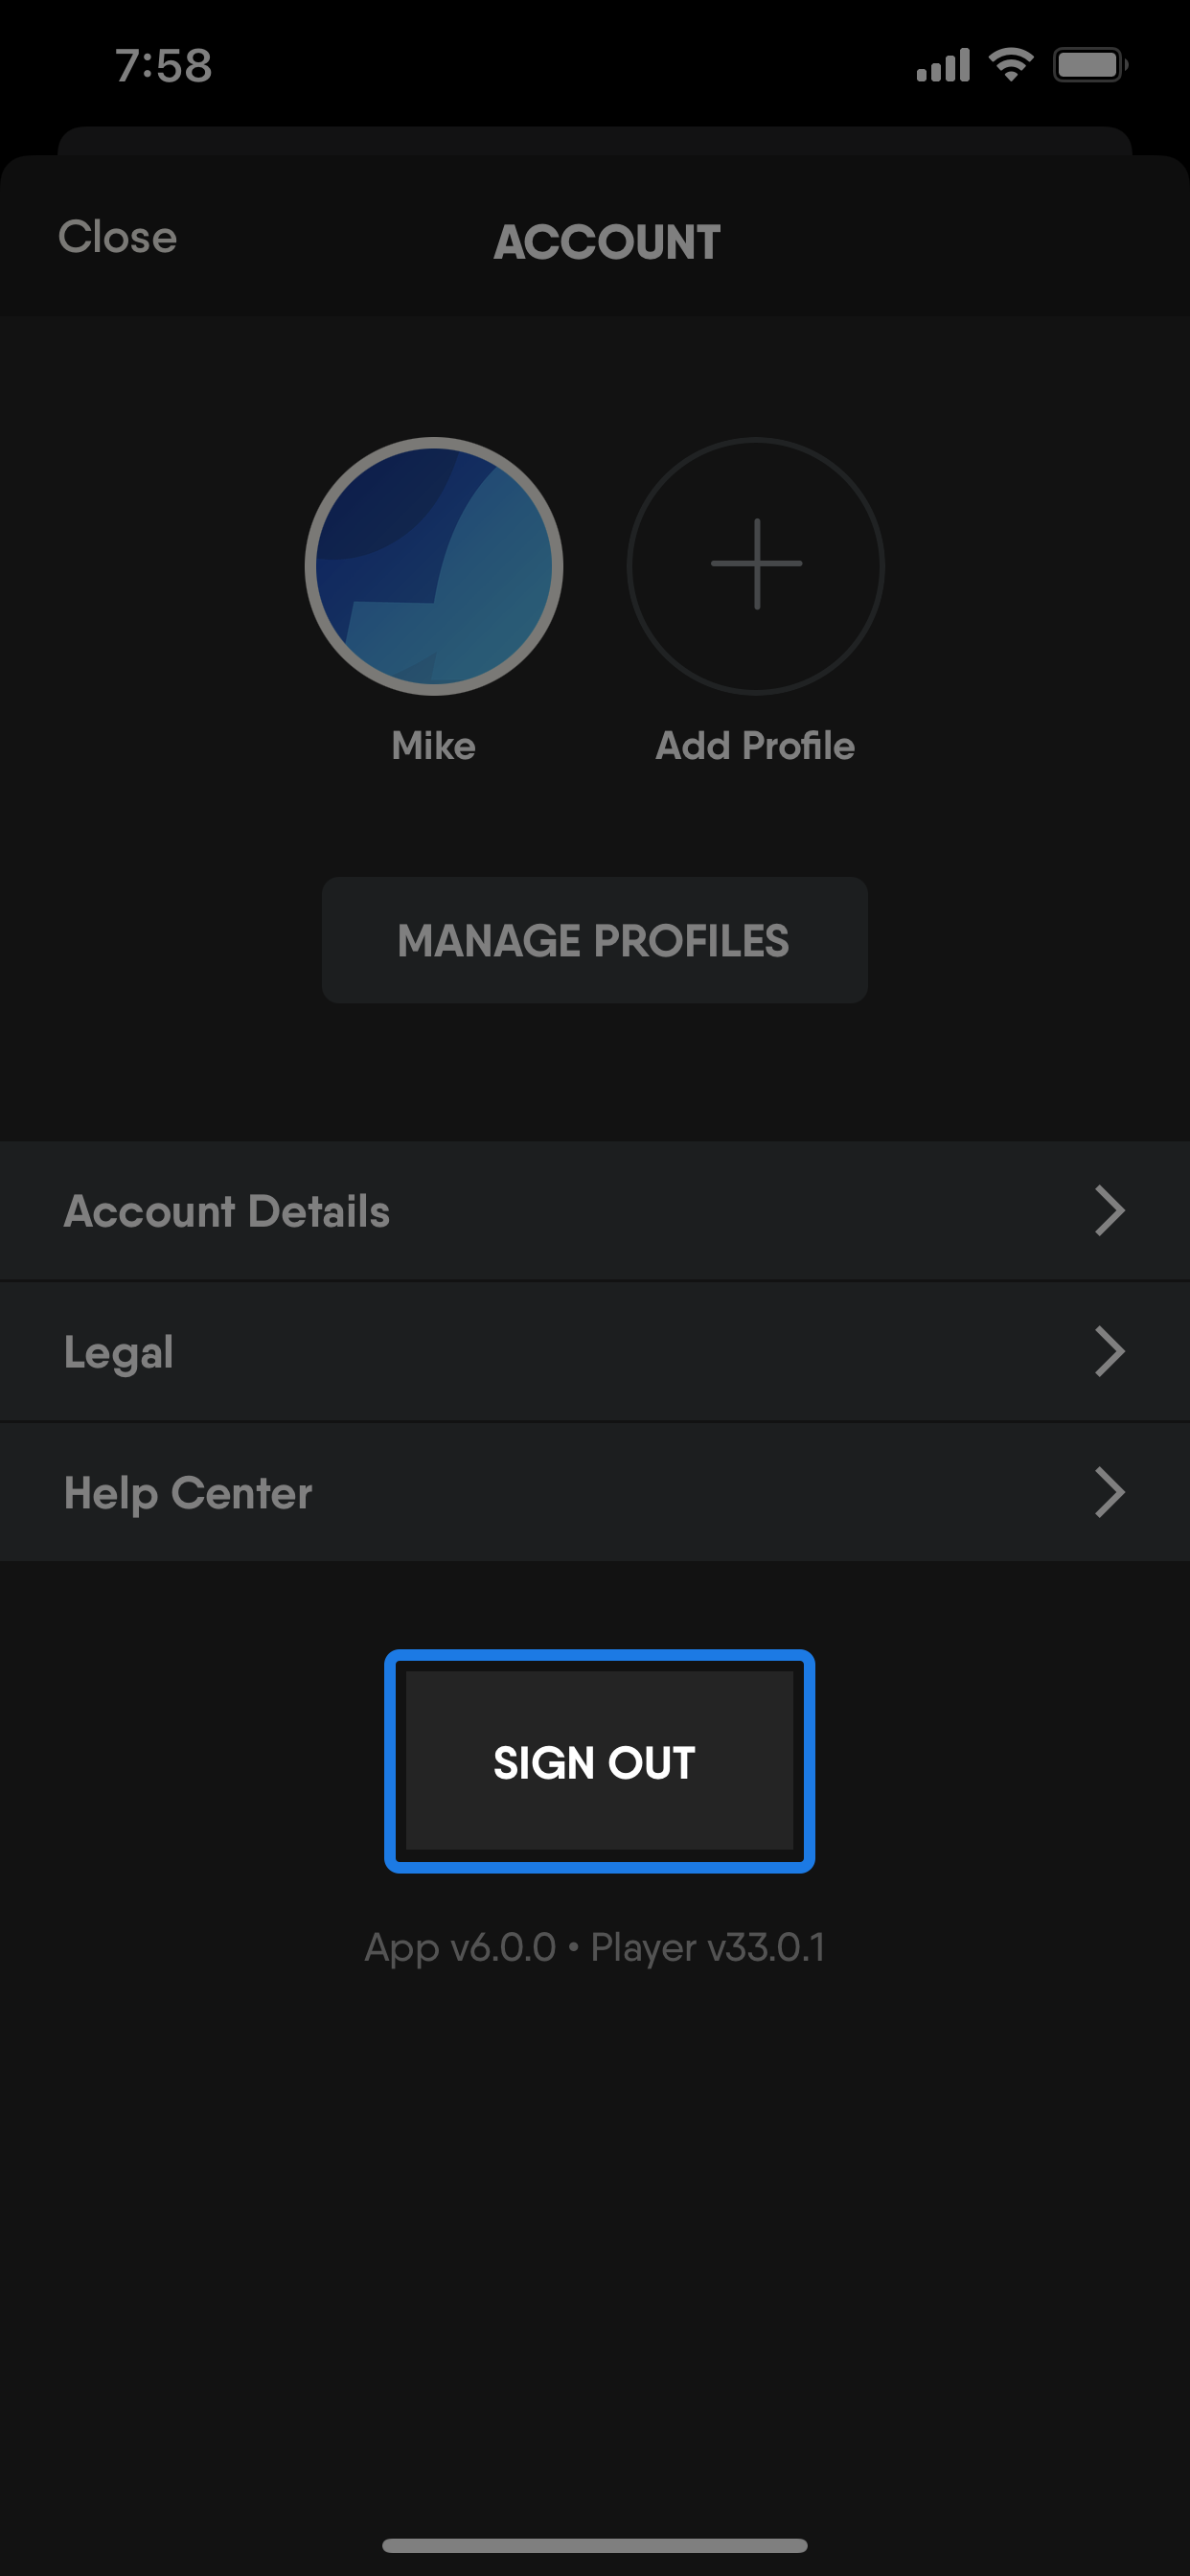 Account page of the FuboTV app on an iOS device with the SIGN OUT button highlighted in the lower-center